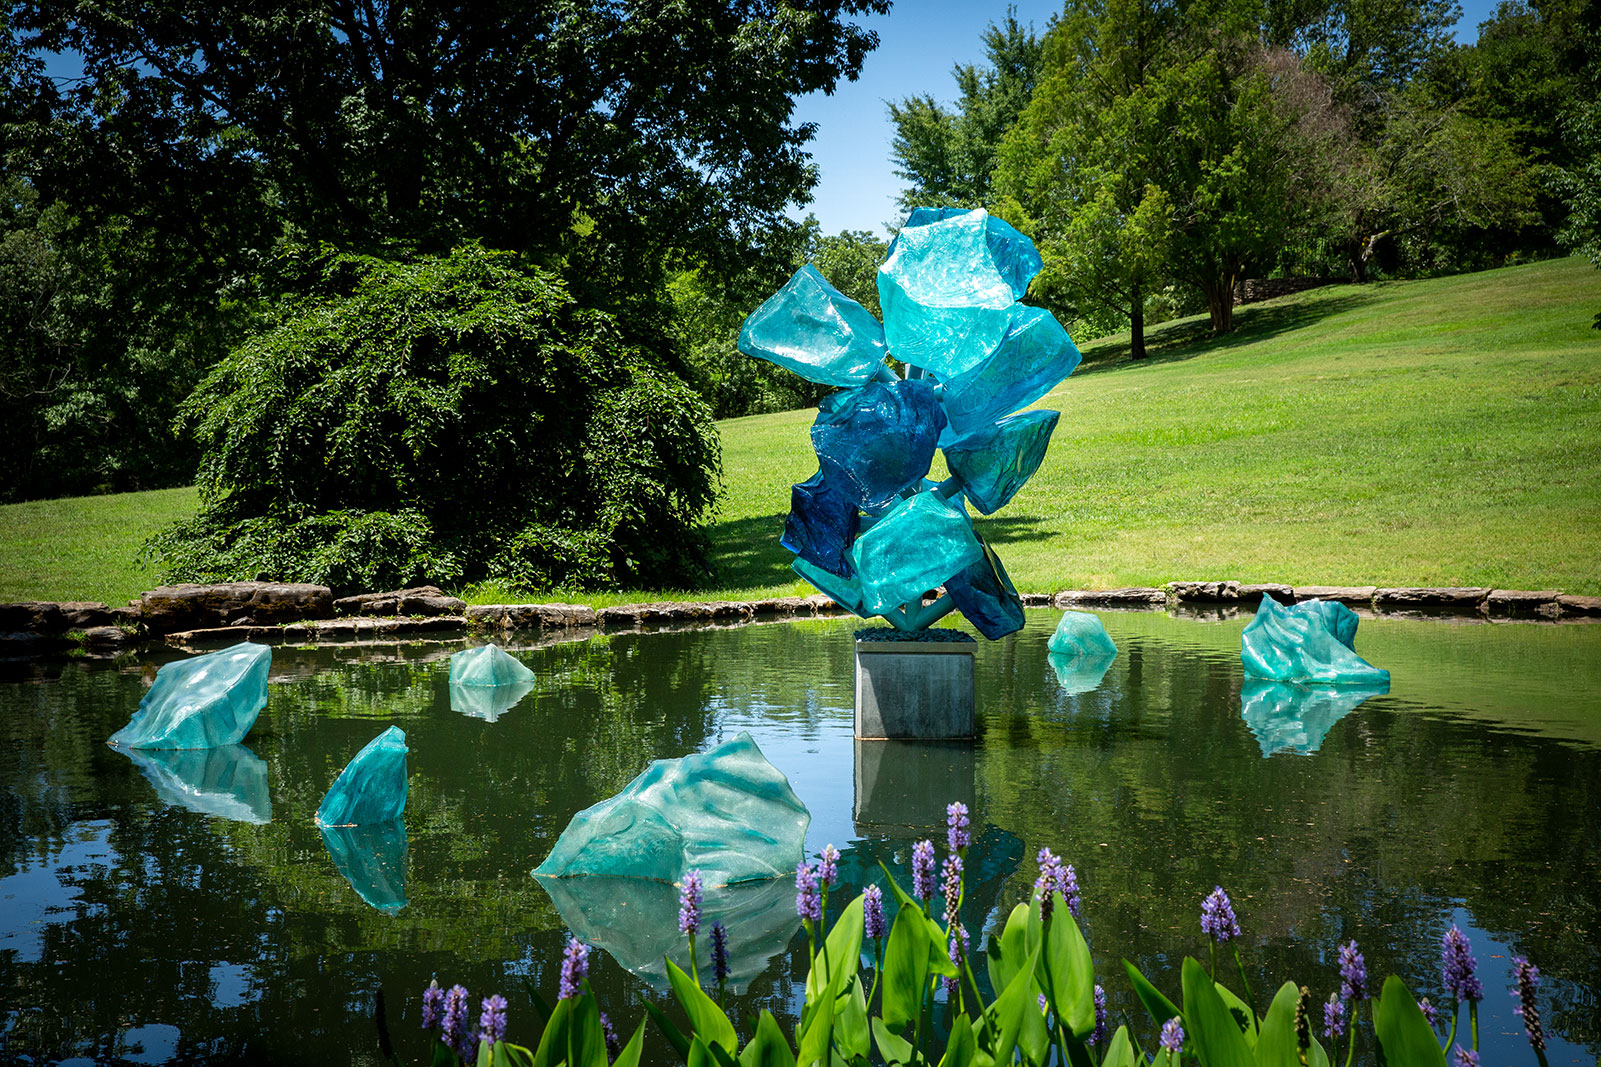 Blue Polyvitro Crystals (2006) by Dale Chihuly